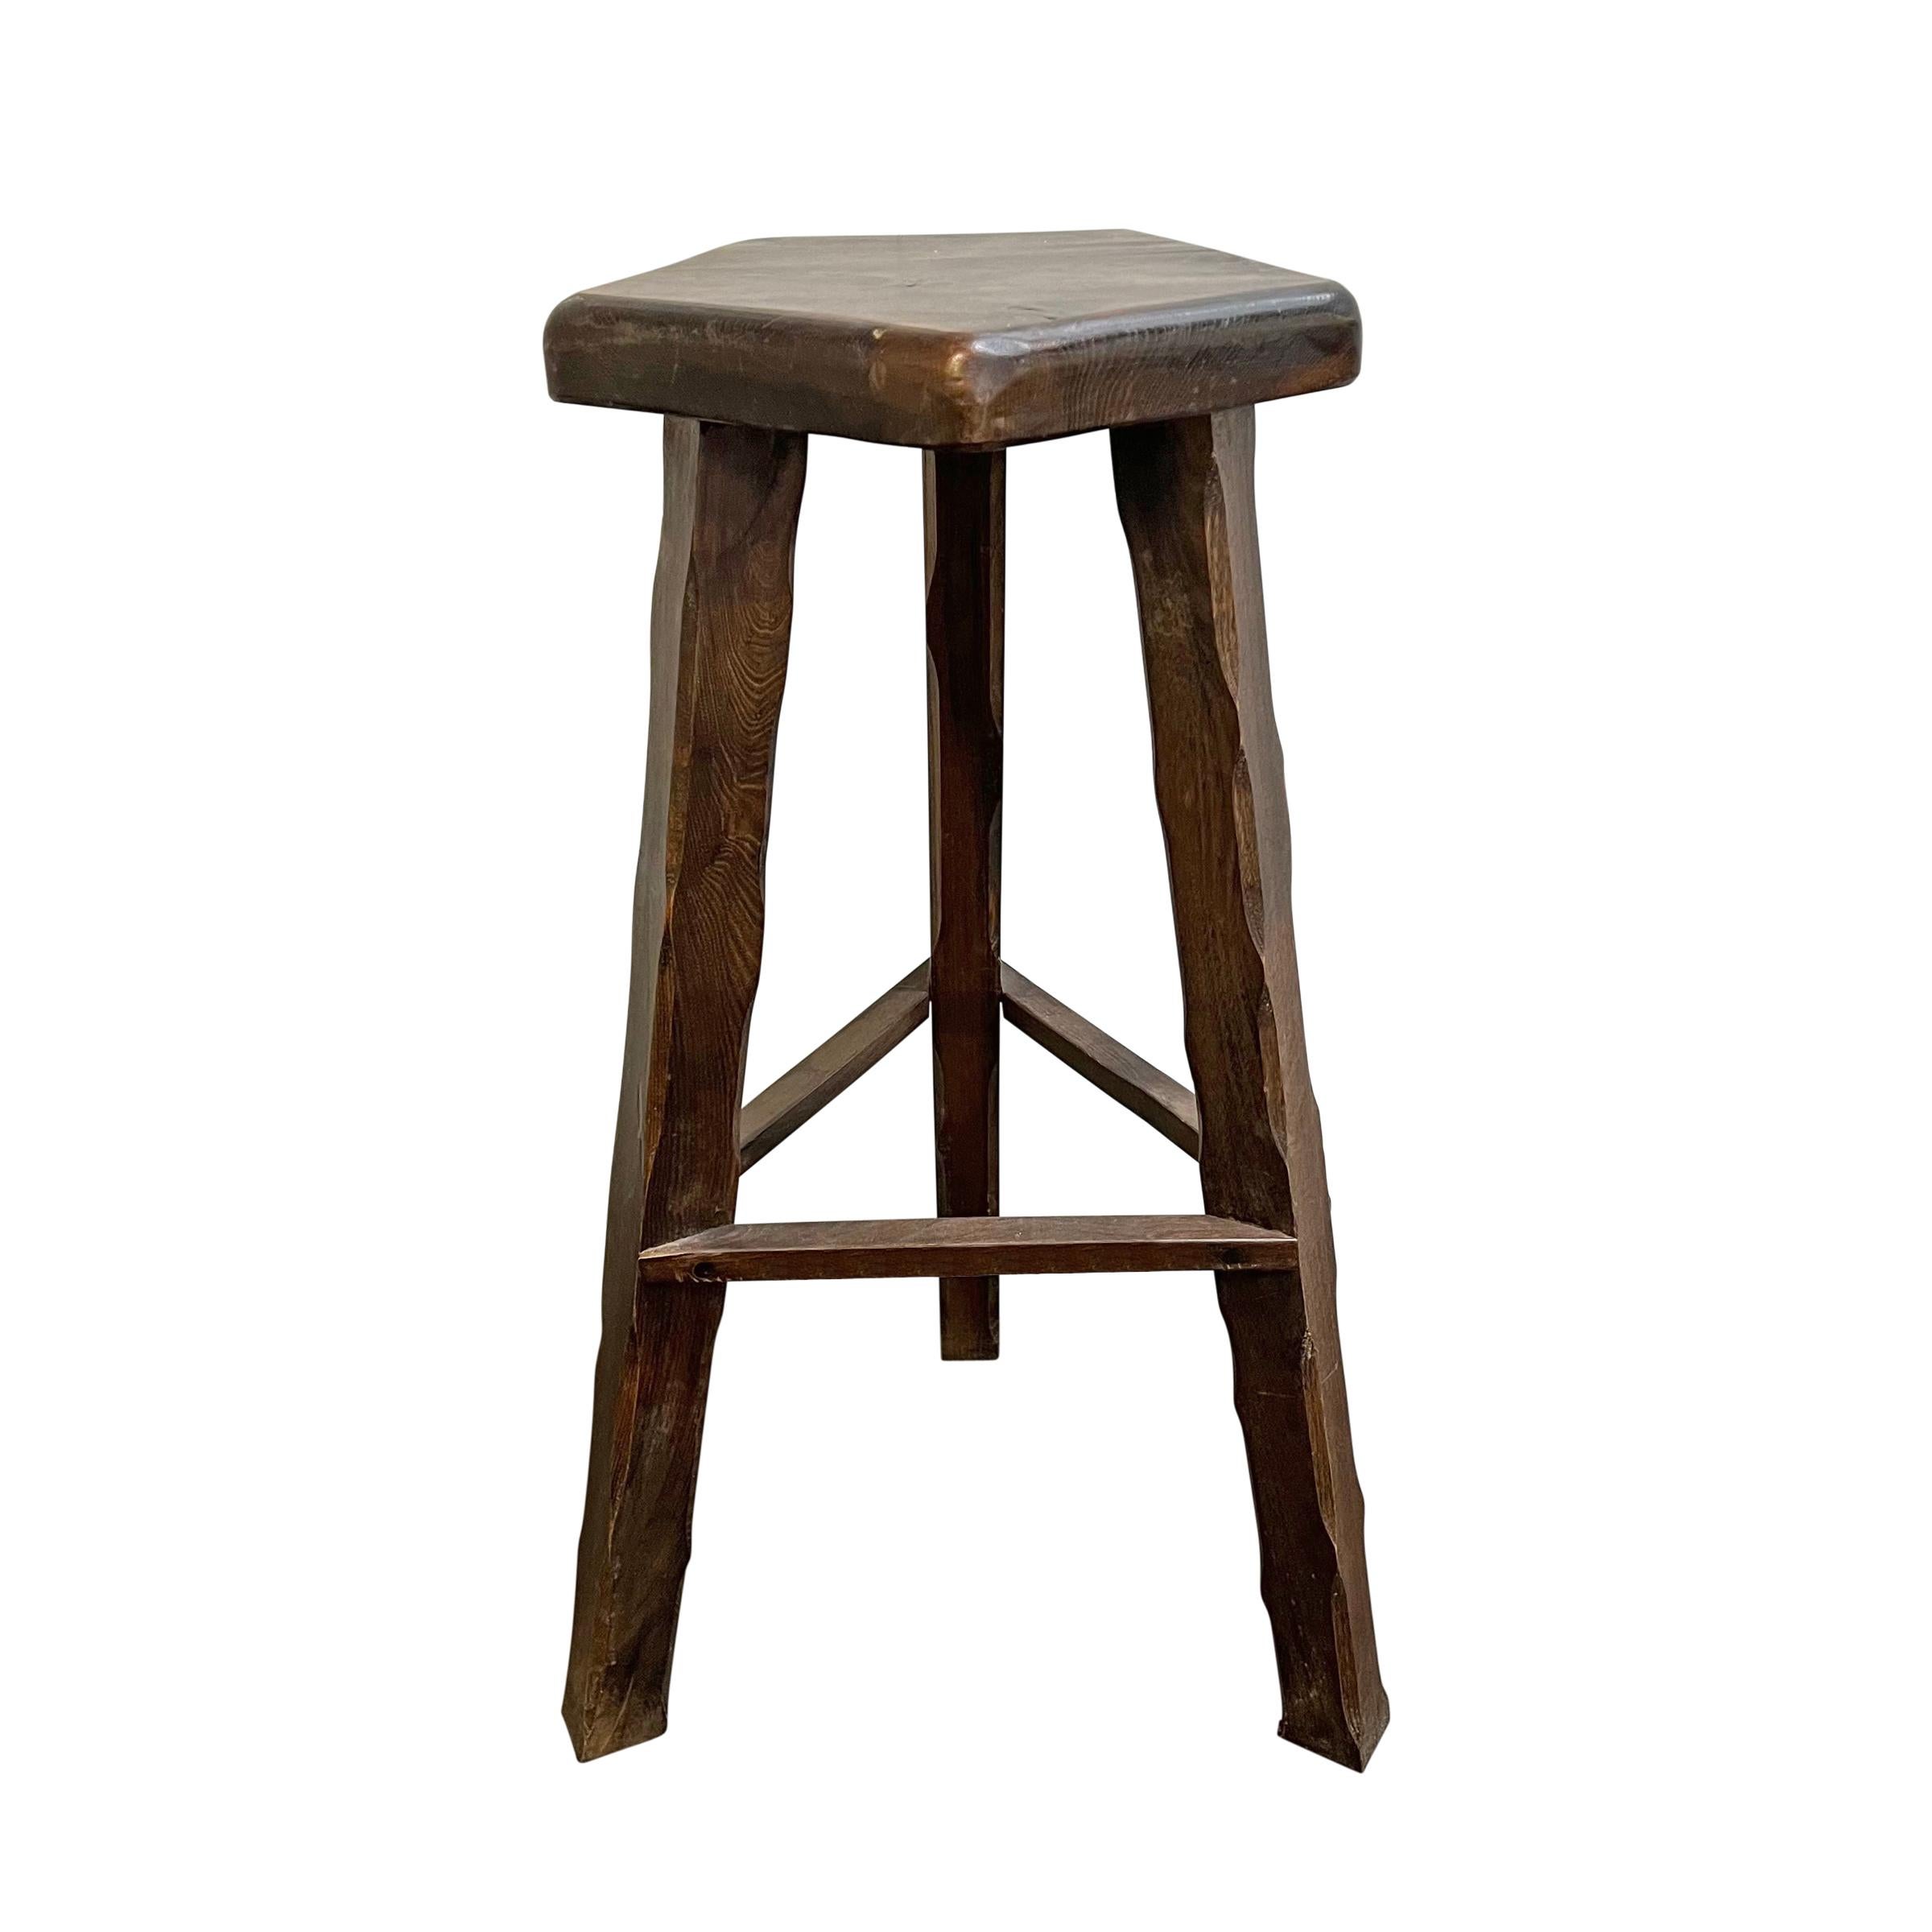 Hand-Crafted Pair of French Brutalist Barstools